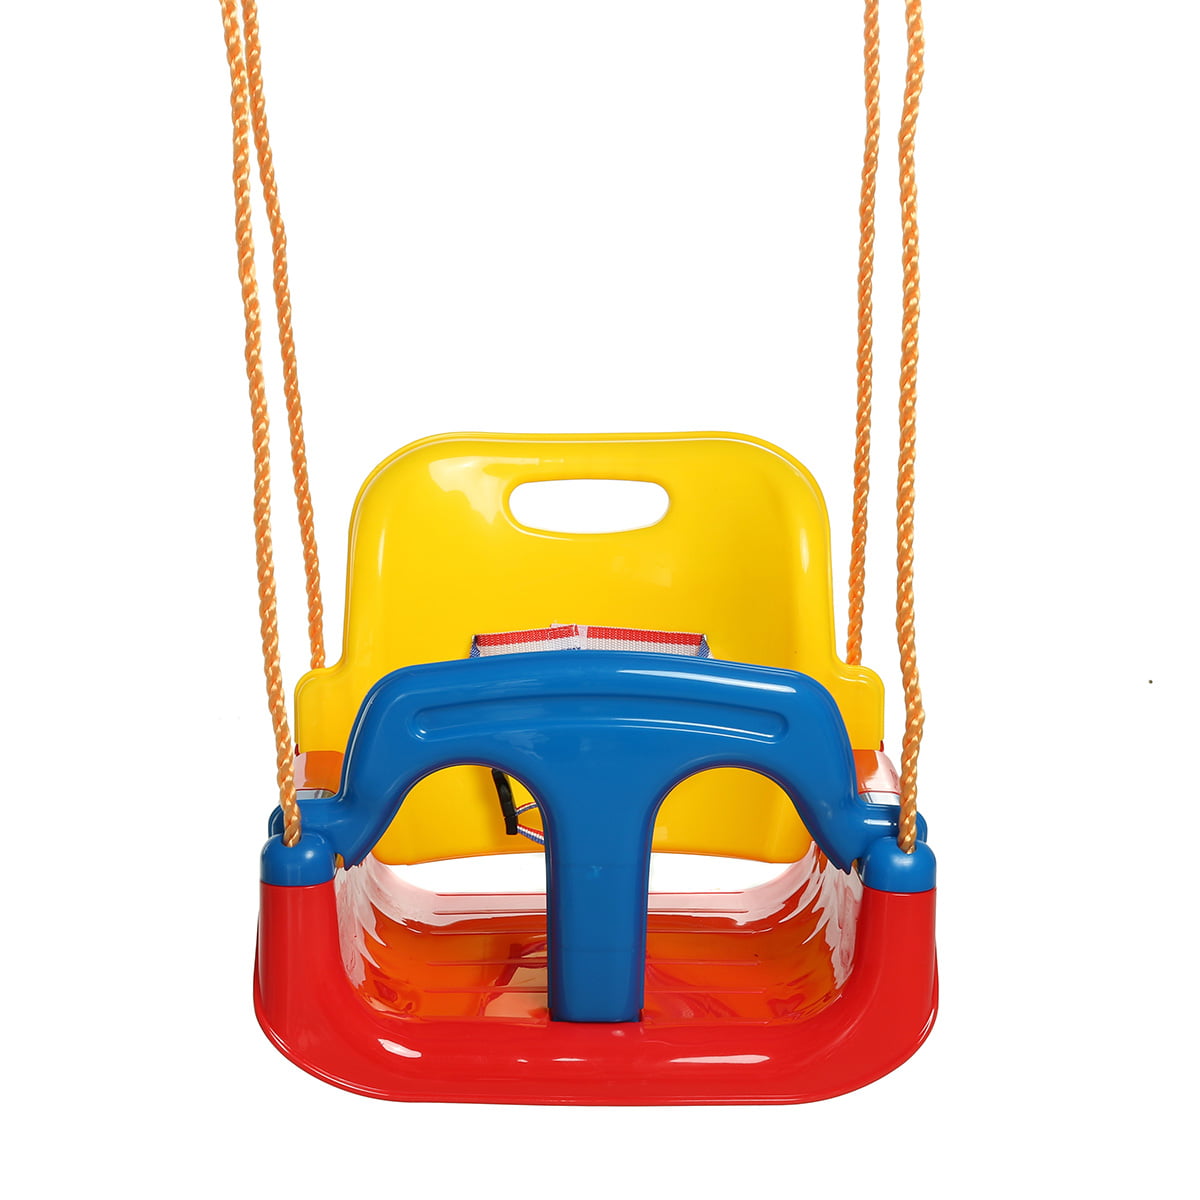 Jiazhounengy 3 in 1 Multifunctional Baby Swing Basket Outdoor Swing Hanging Toy for Kids